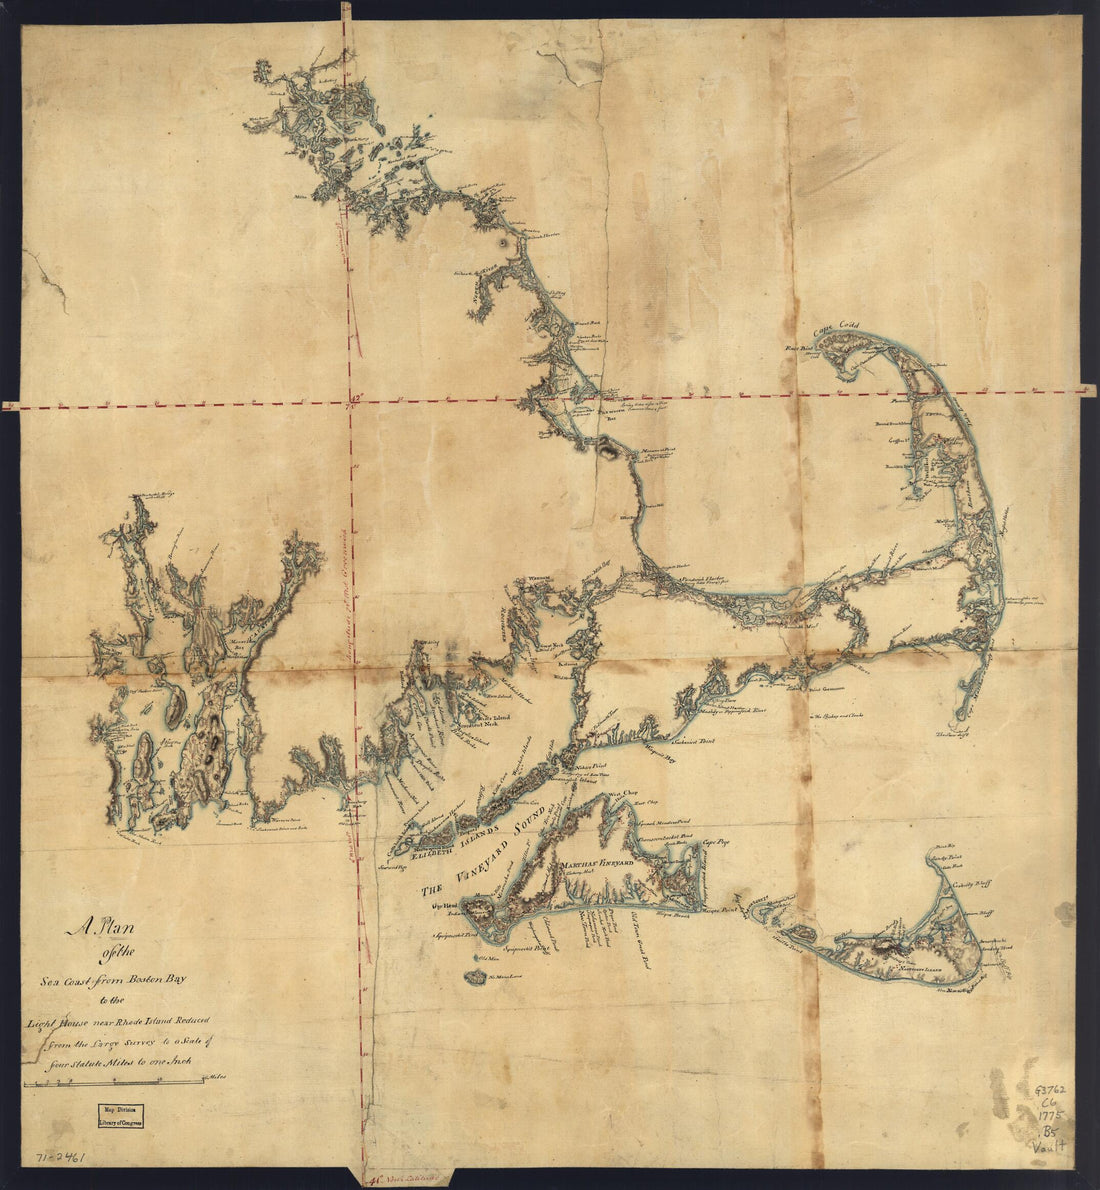 This old map of A Plan of the Sea Coast from Boston Bay to the Light House Near Rhode Island, Reduced from the Large Survey from 1775 was created by Charles Blaskowitz in 1775